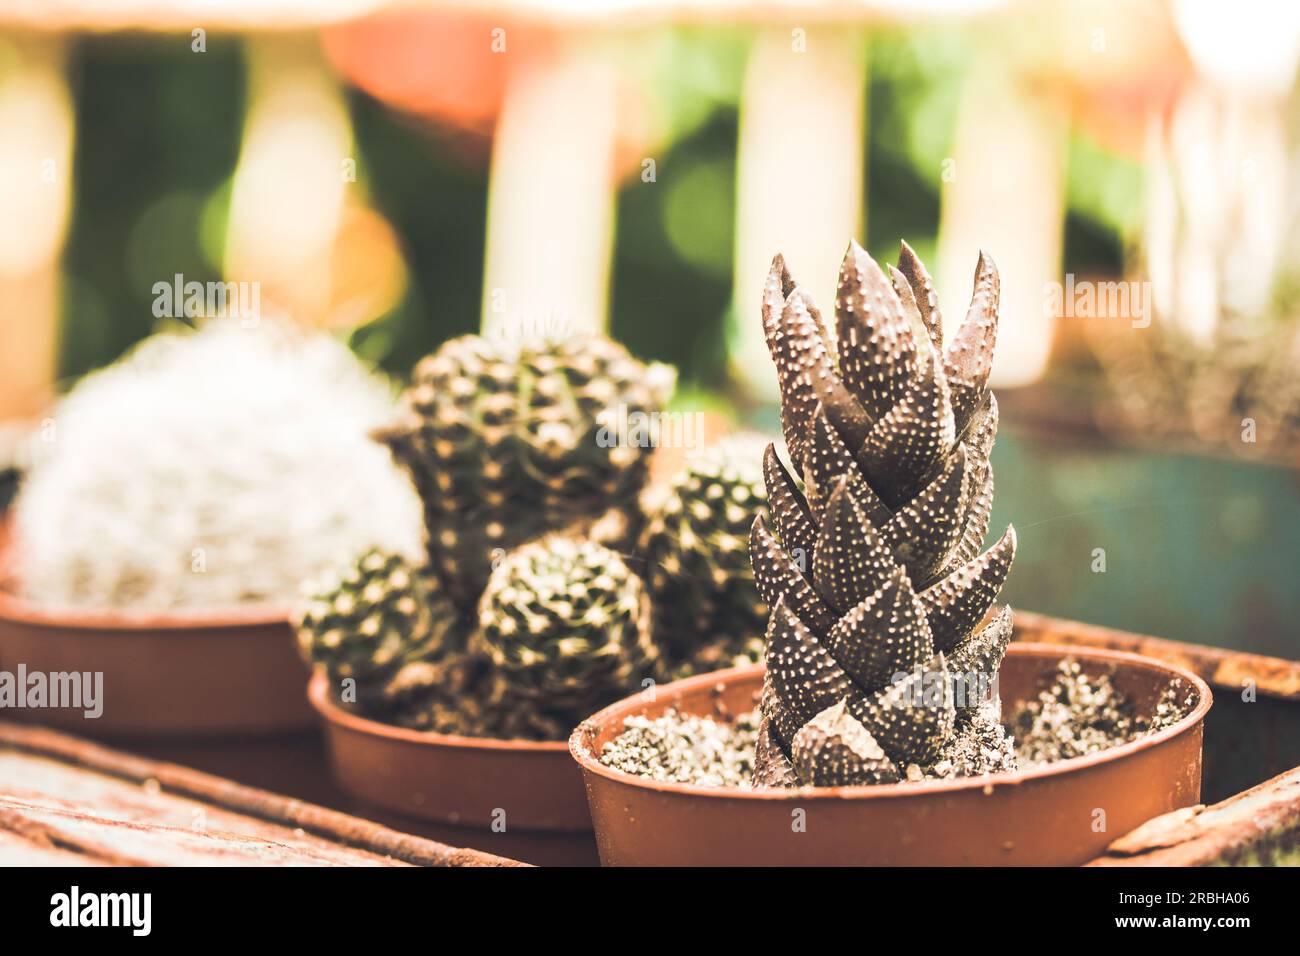 Haworthiopsis reinwardtii or Haworthia reinwardtii succulent flowering plant native to South Africa. Growing a variety of cacti in greenhouse. Growing Stock Photo